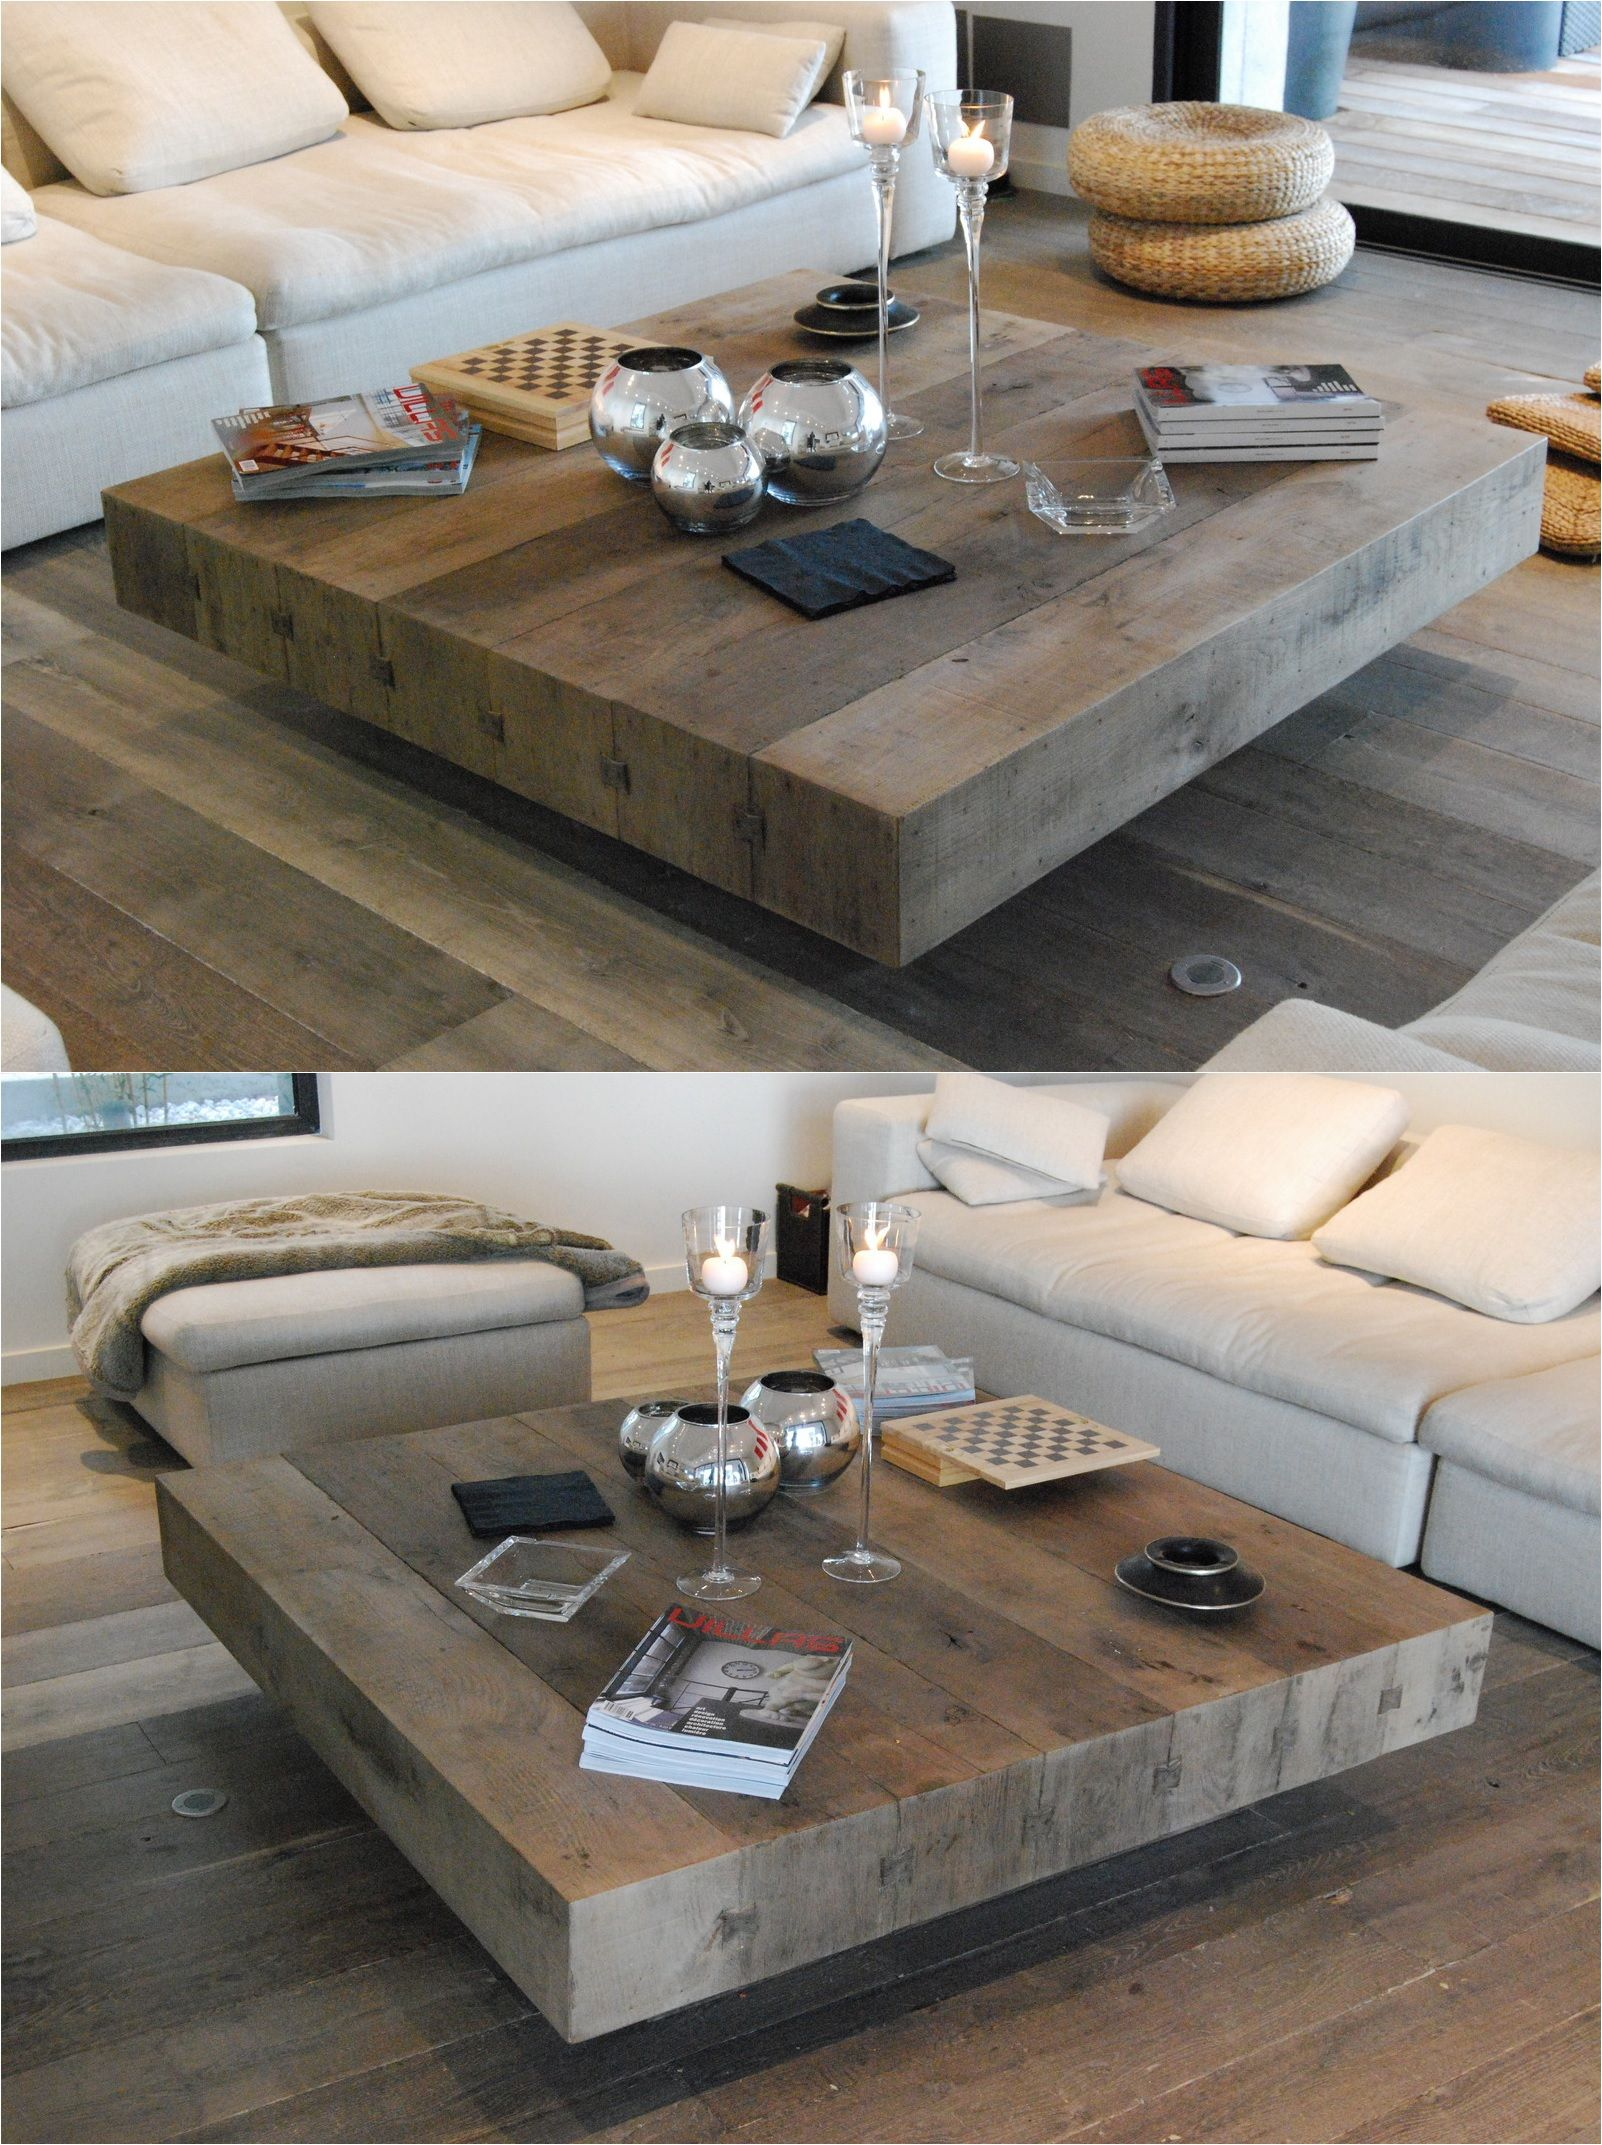 Big Square Coffee Table Wood Hipenmoedernl within sizing 1602 X 2145